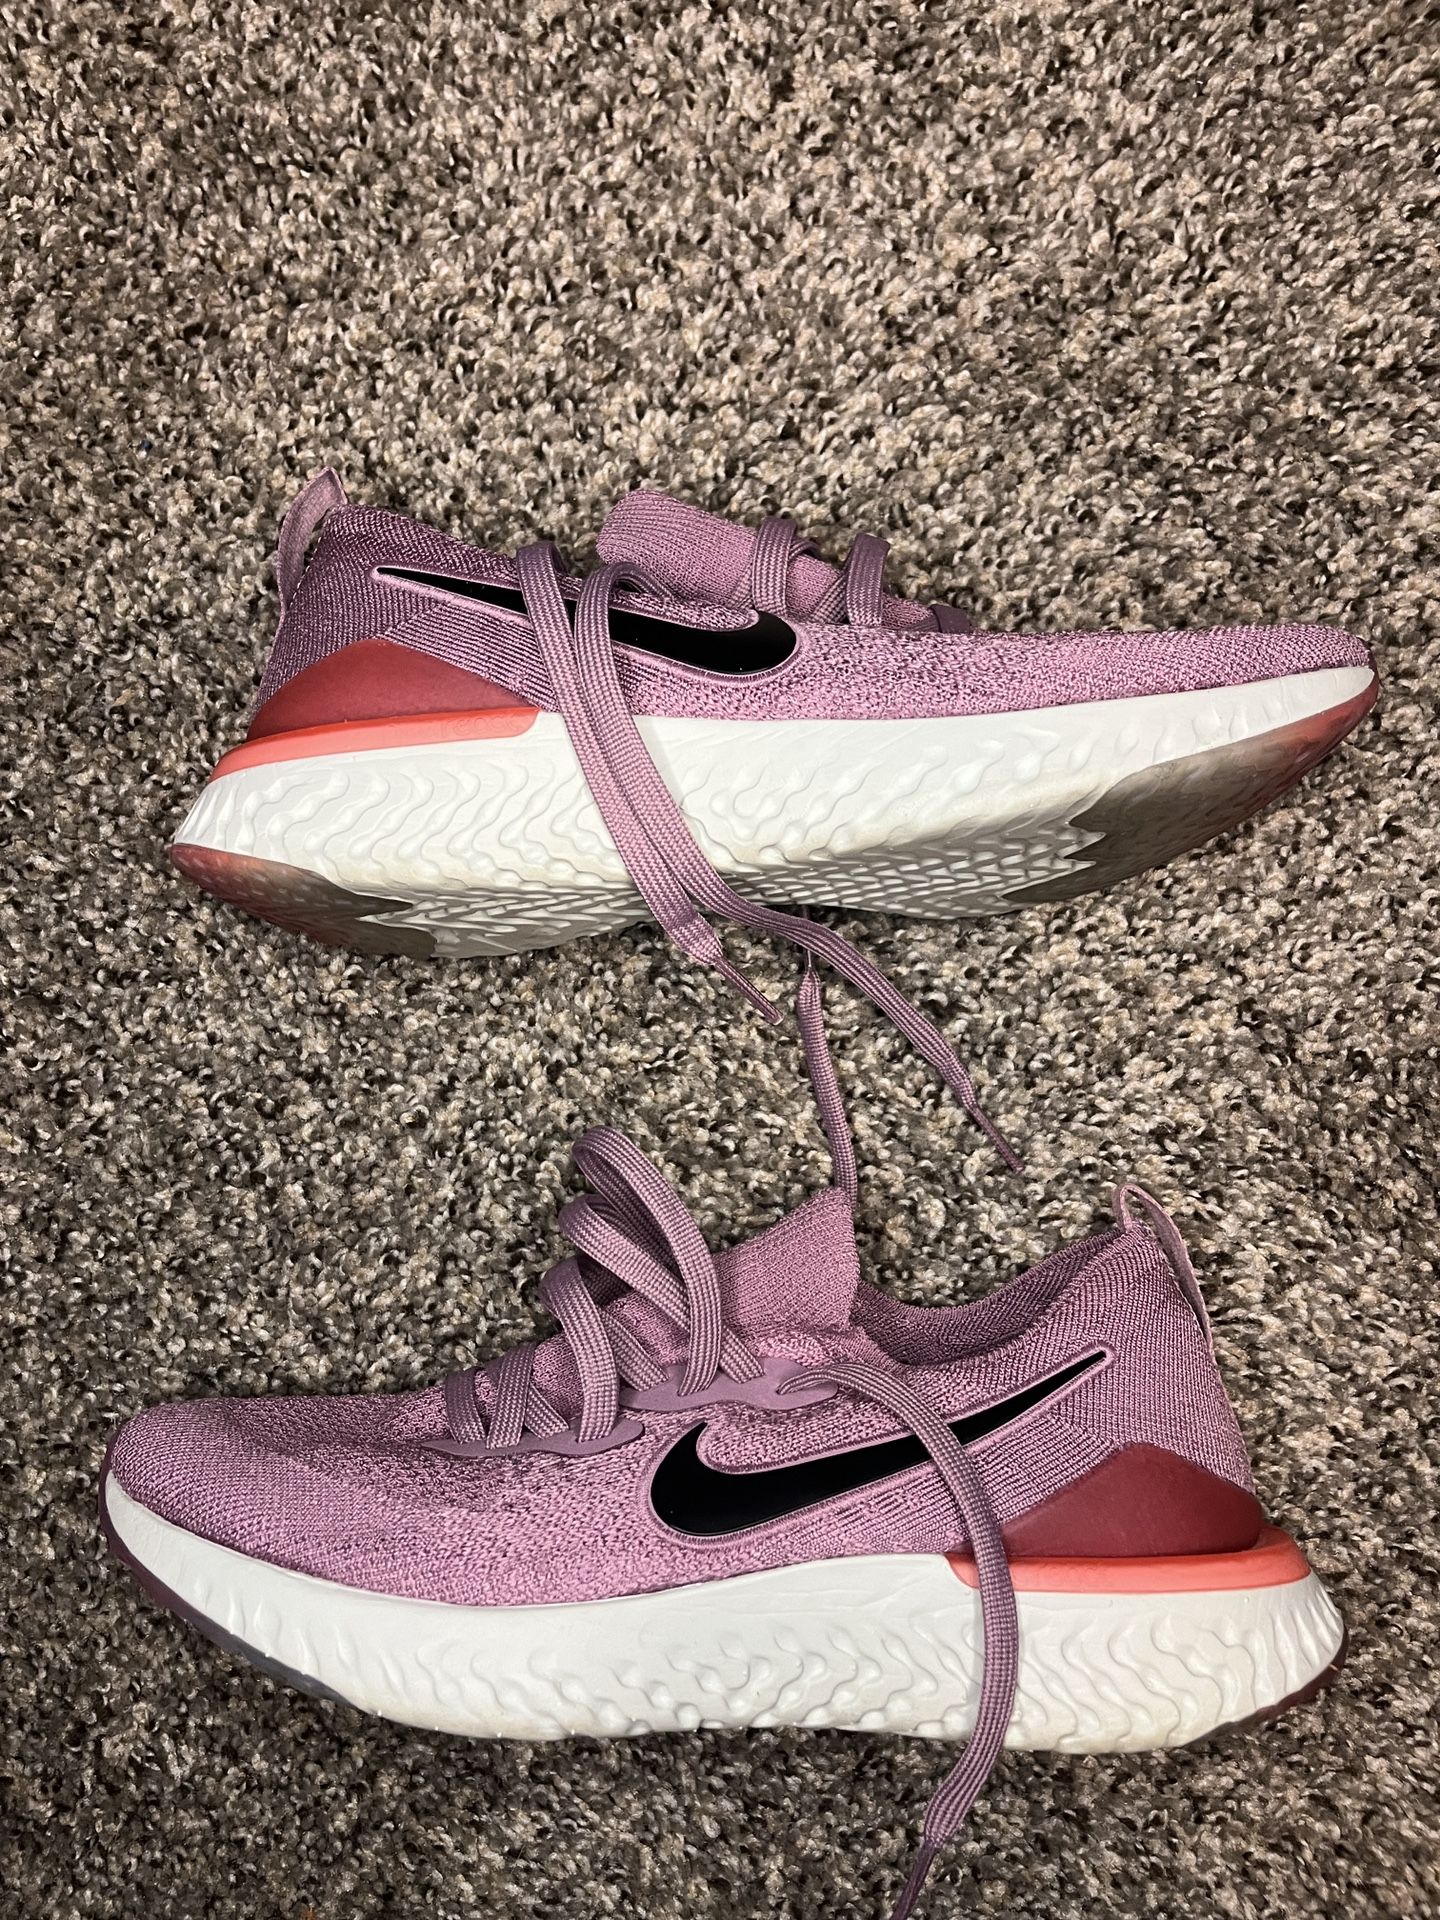 Nike Womens Epic React Flyknit 2 pink white Low Shoes 